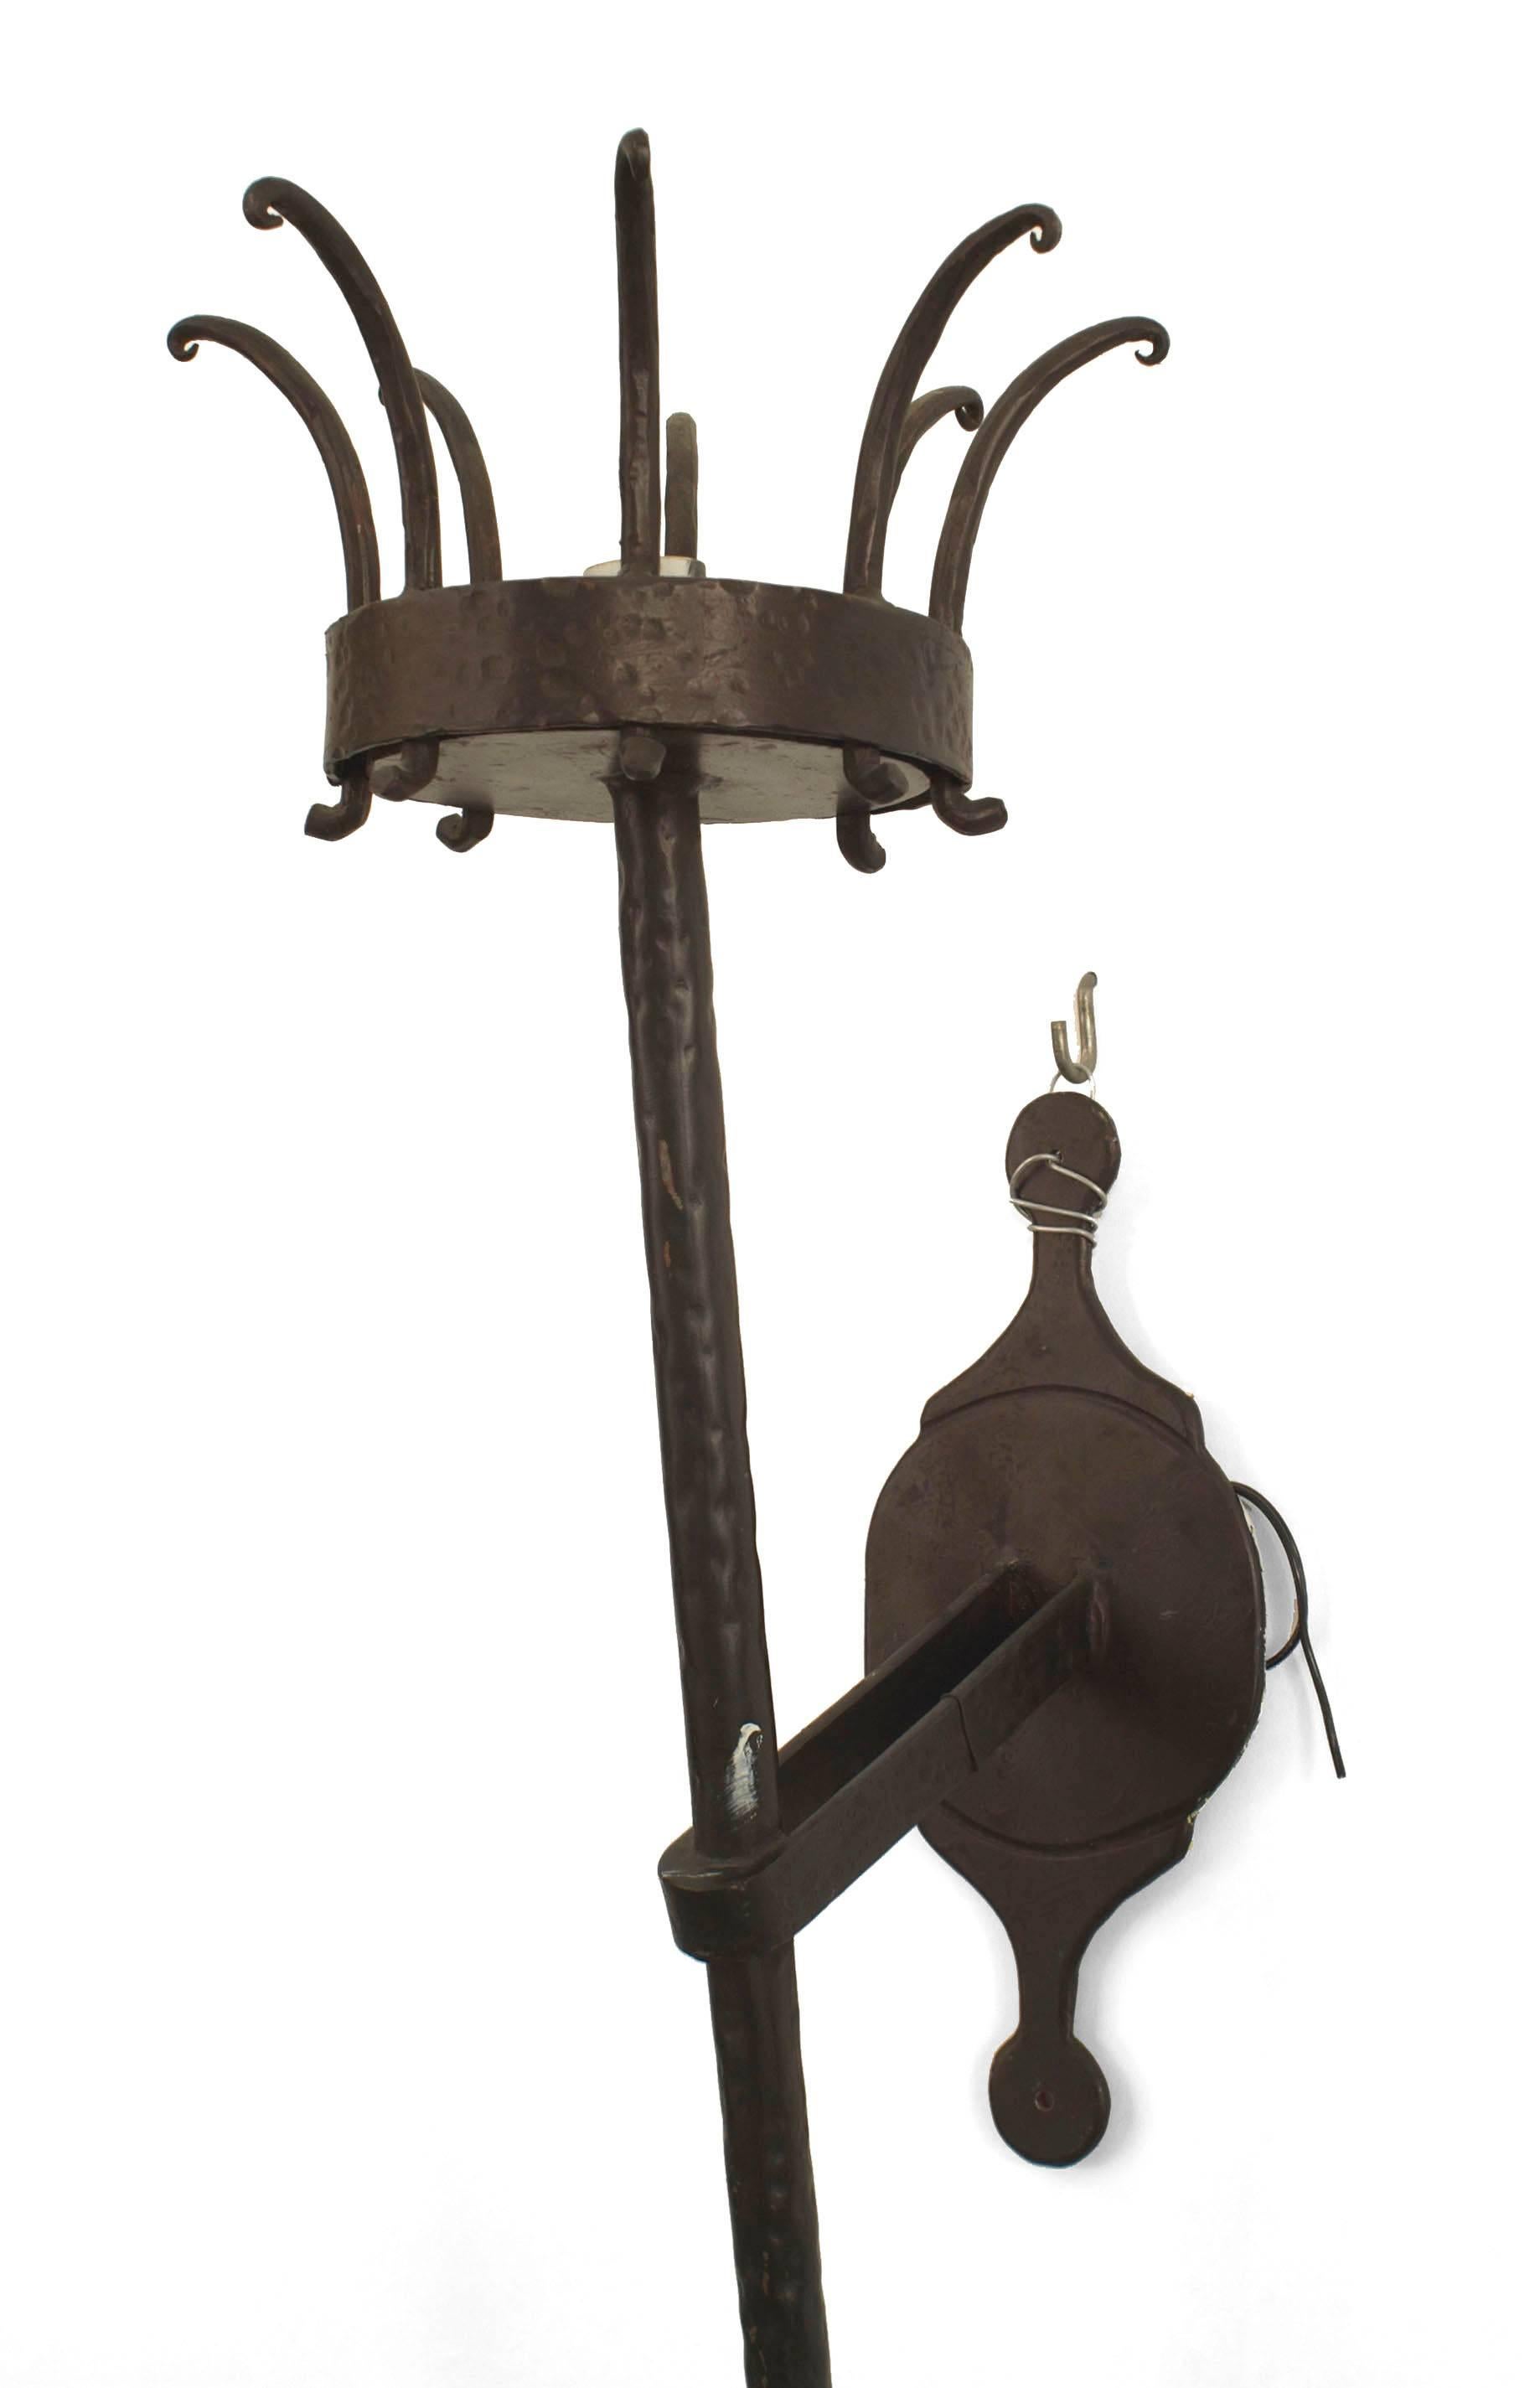 Renaissance Revival 4 Italian Renaissance Style Wrought Iron and Glass Torch Wall Sconces For Sale